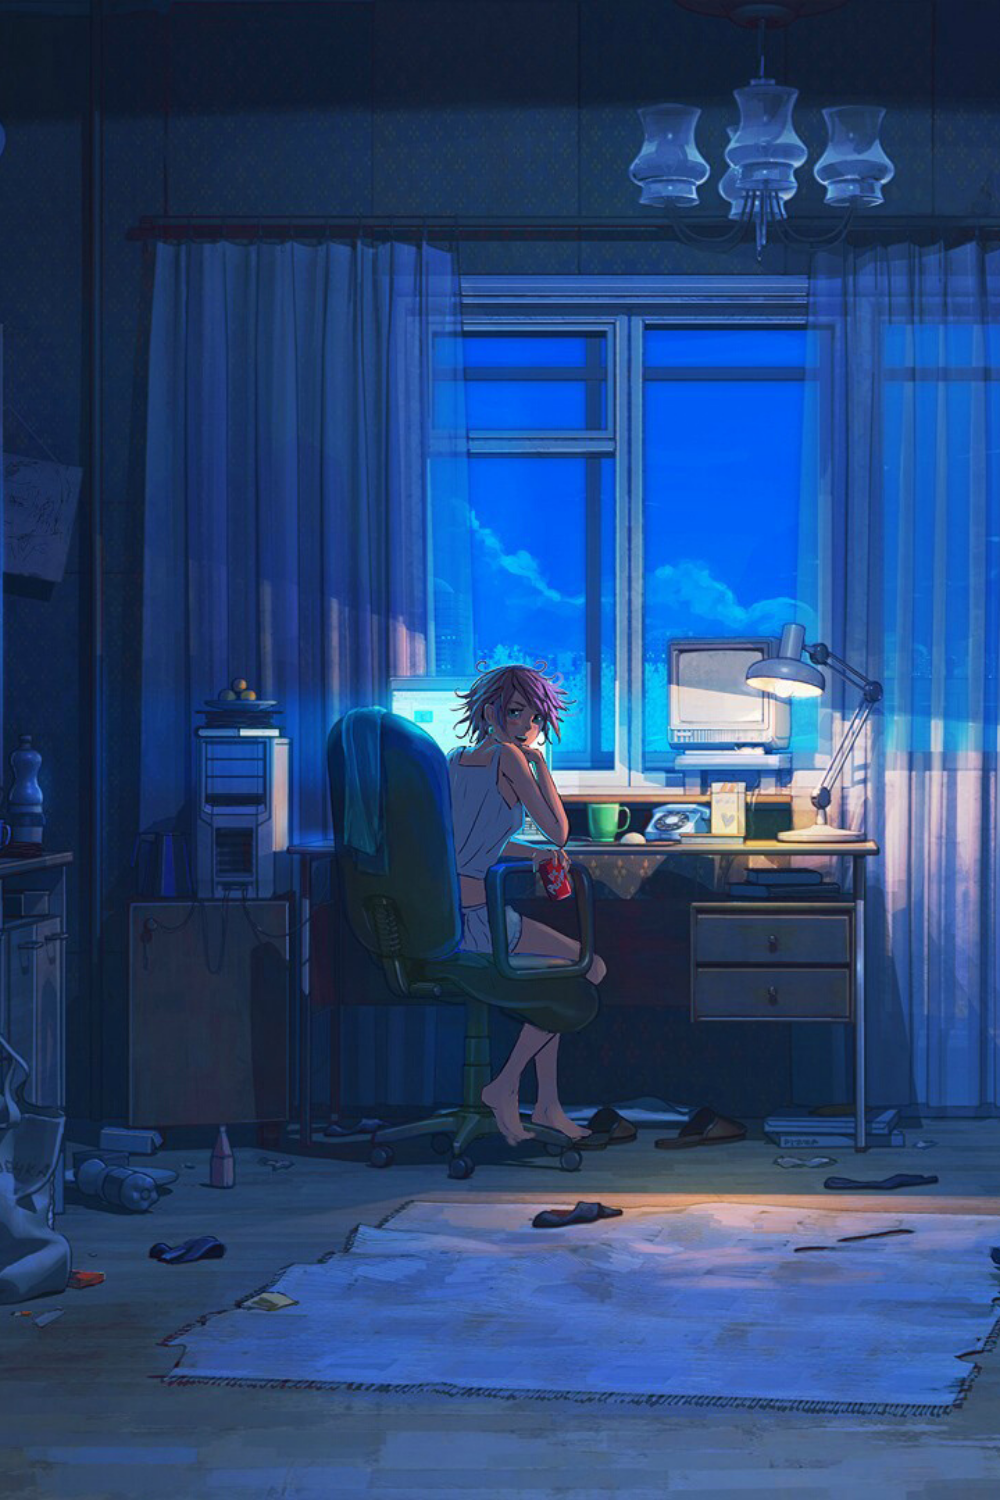 Late night chillin'. HD anime wallpaper, Anime wallpaper, Android wallpaper